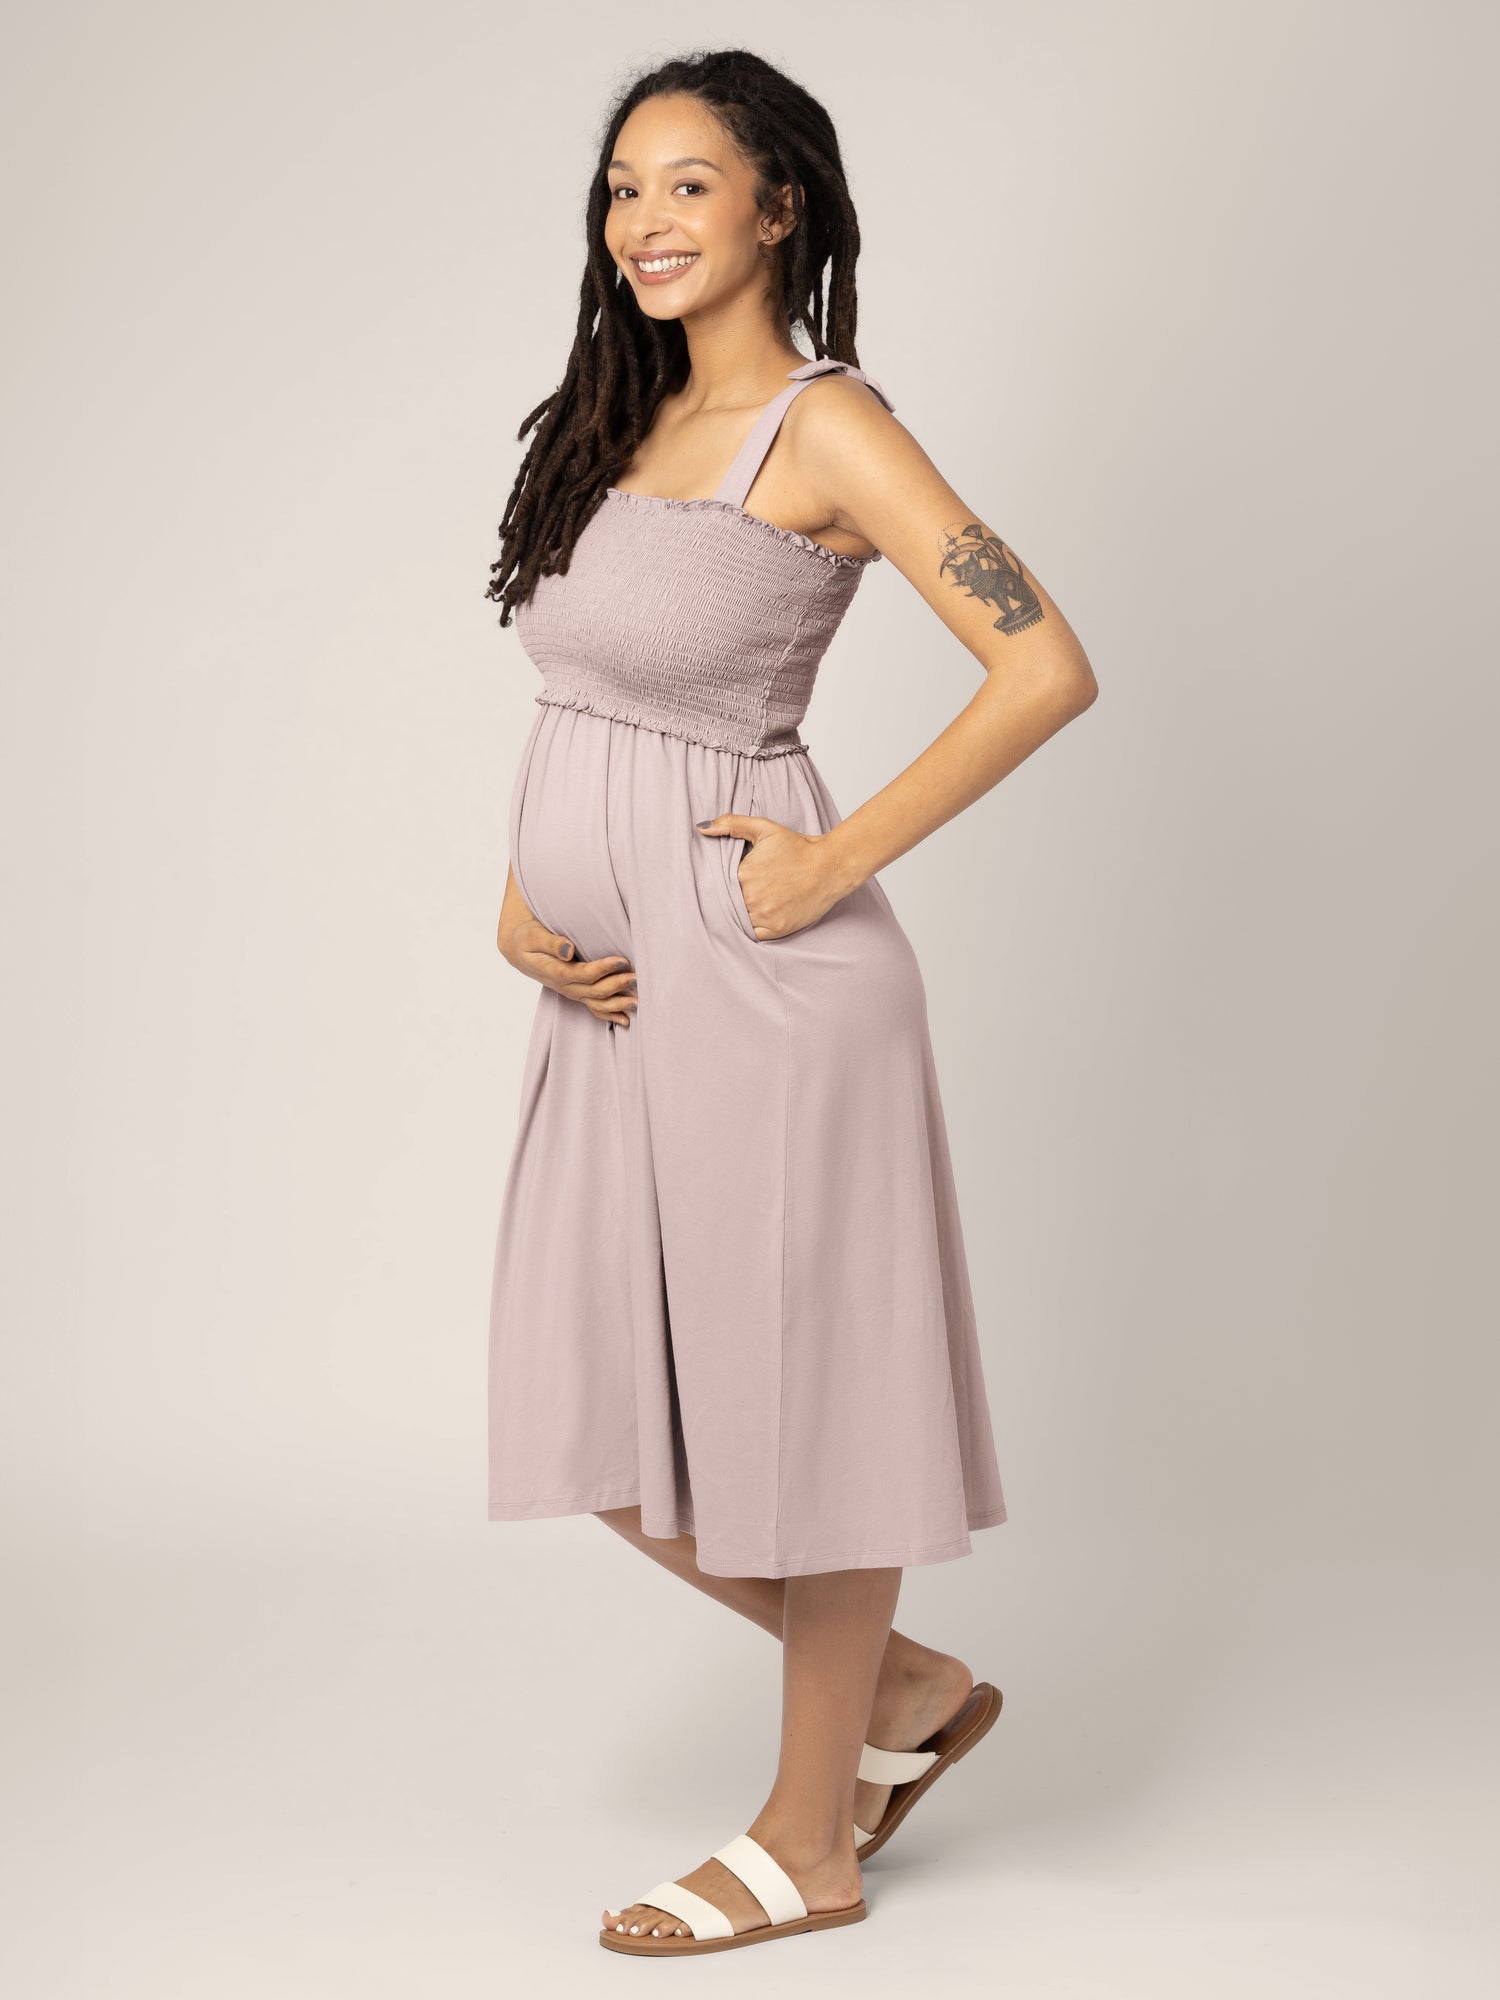 Pregnant model wearing the Sienna Smocked Maternity & Nursing Dress in lilac stone